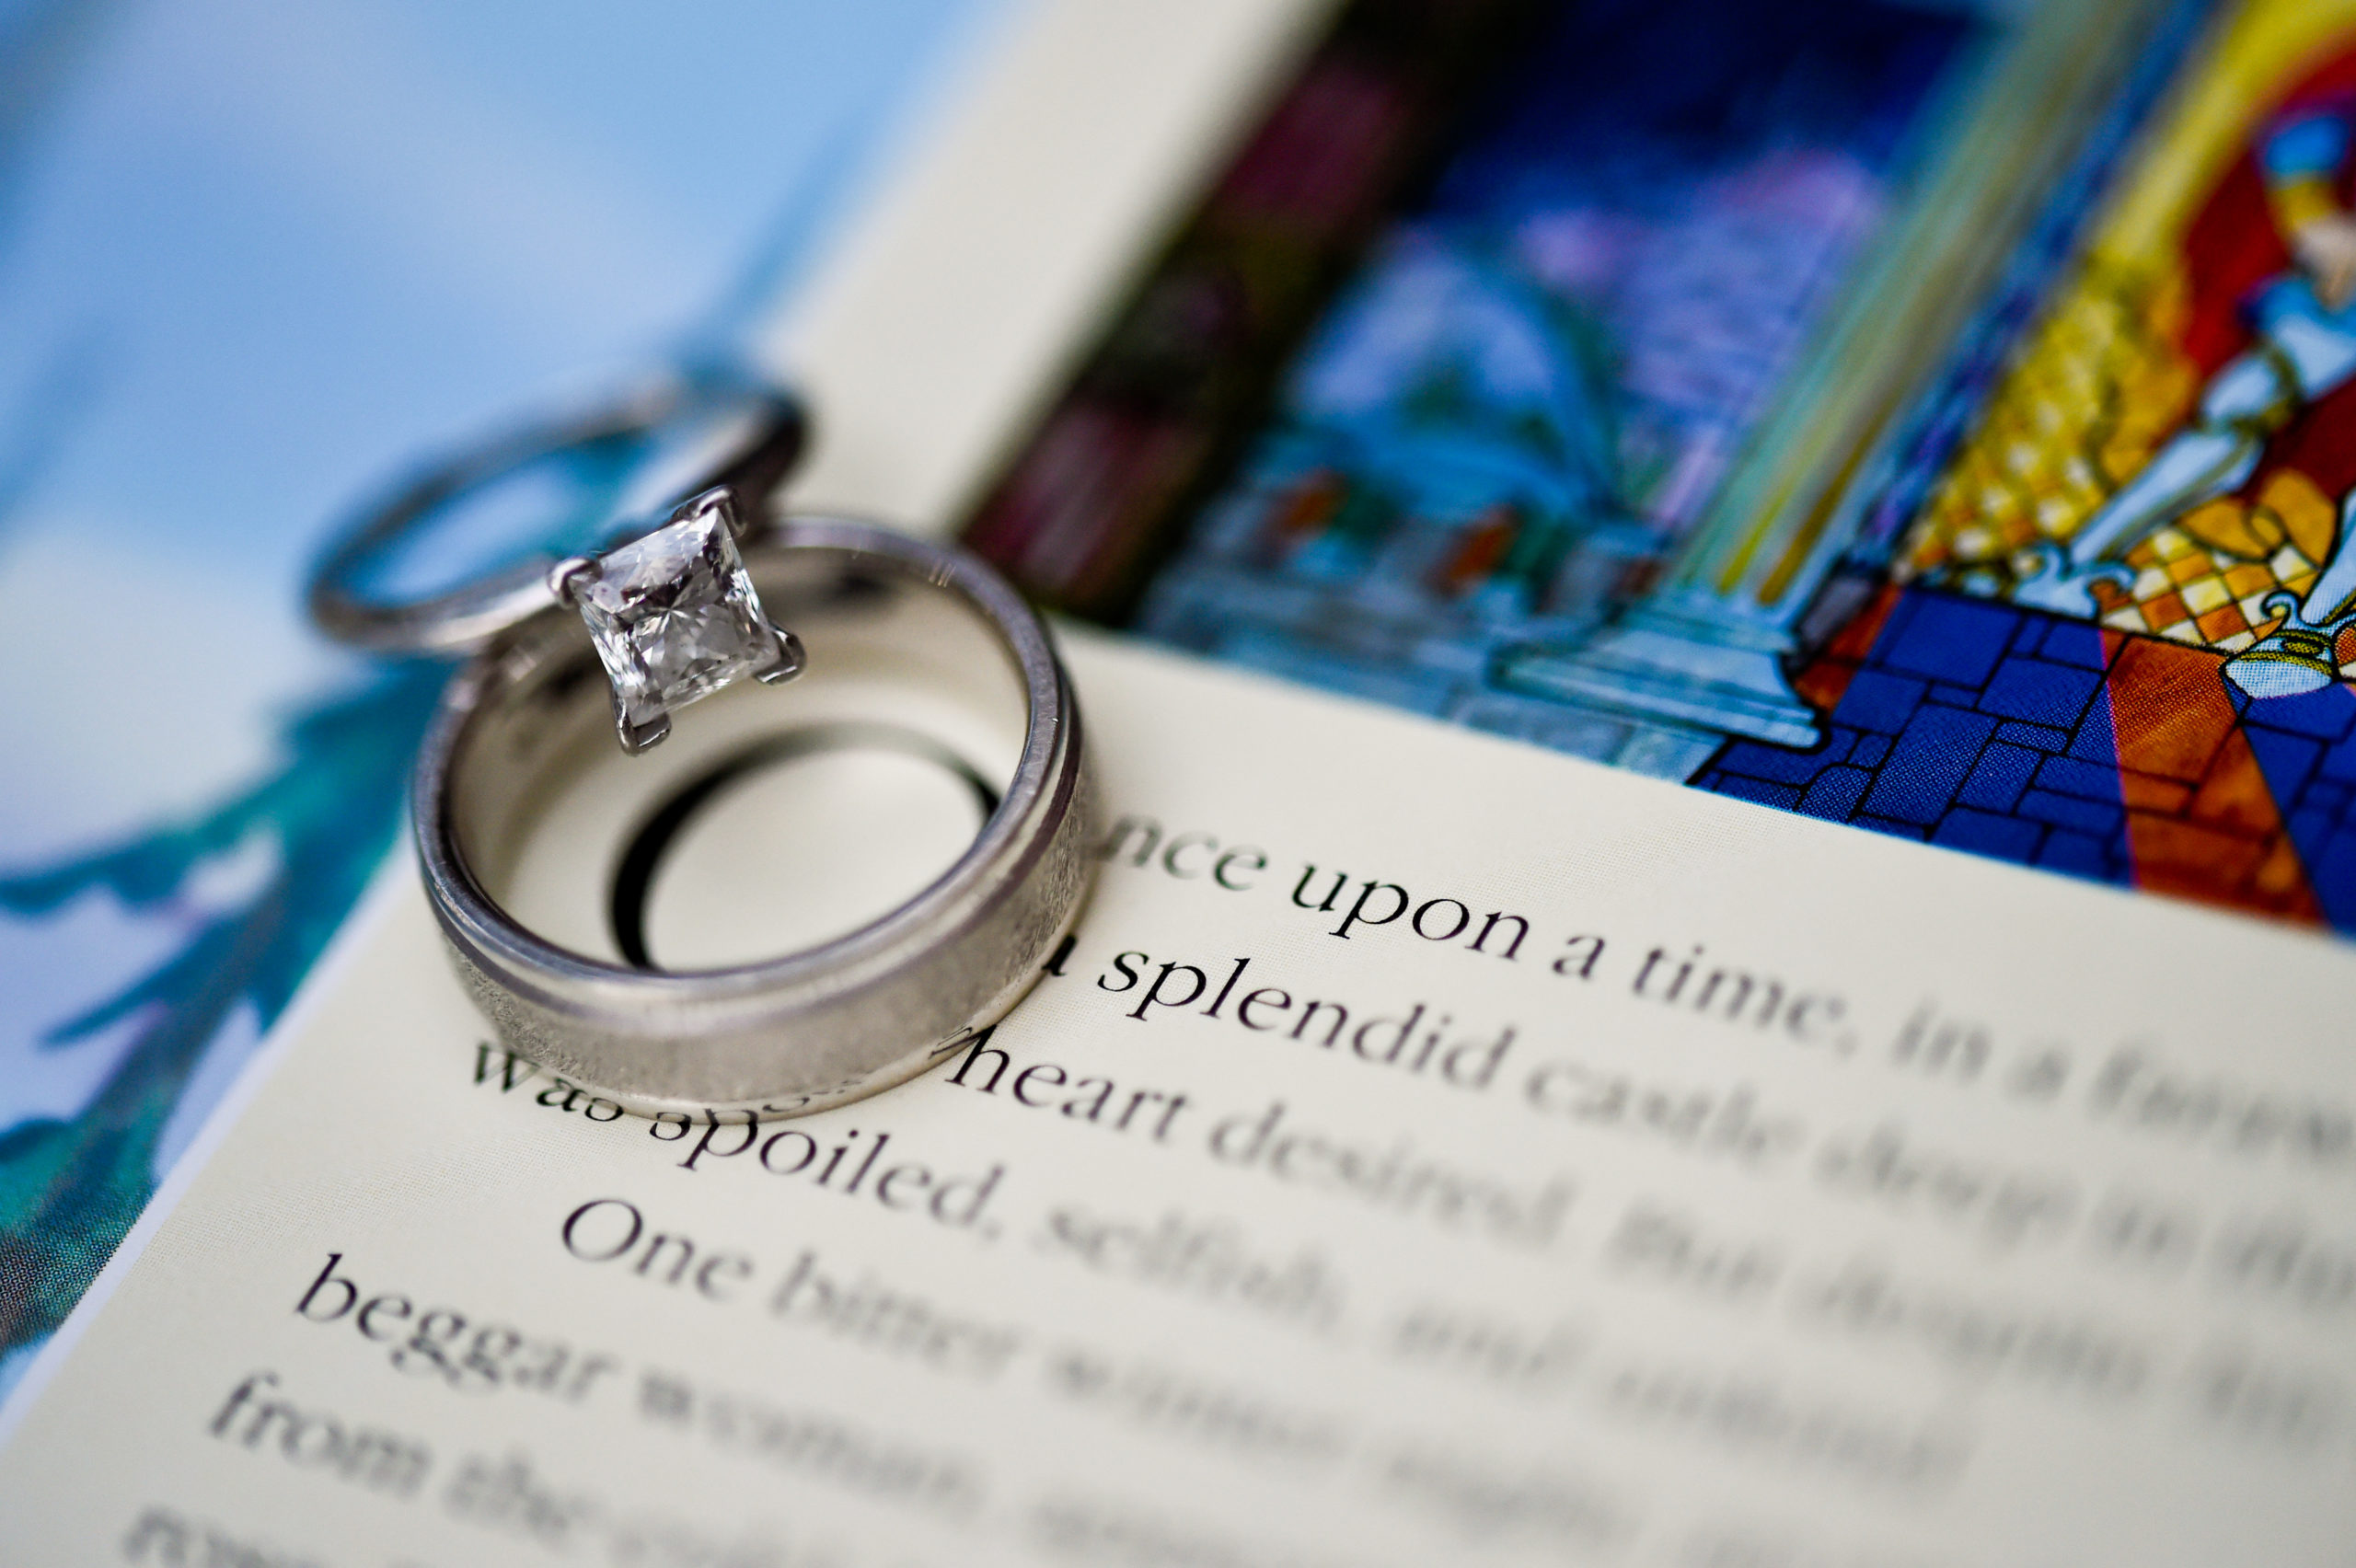 Looking for Disney wedding ideas? This Beauty and the Beast wedding even featured the classic story book used in a ring detail shot